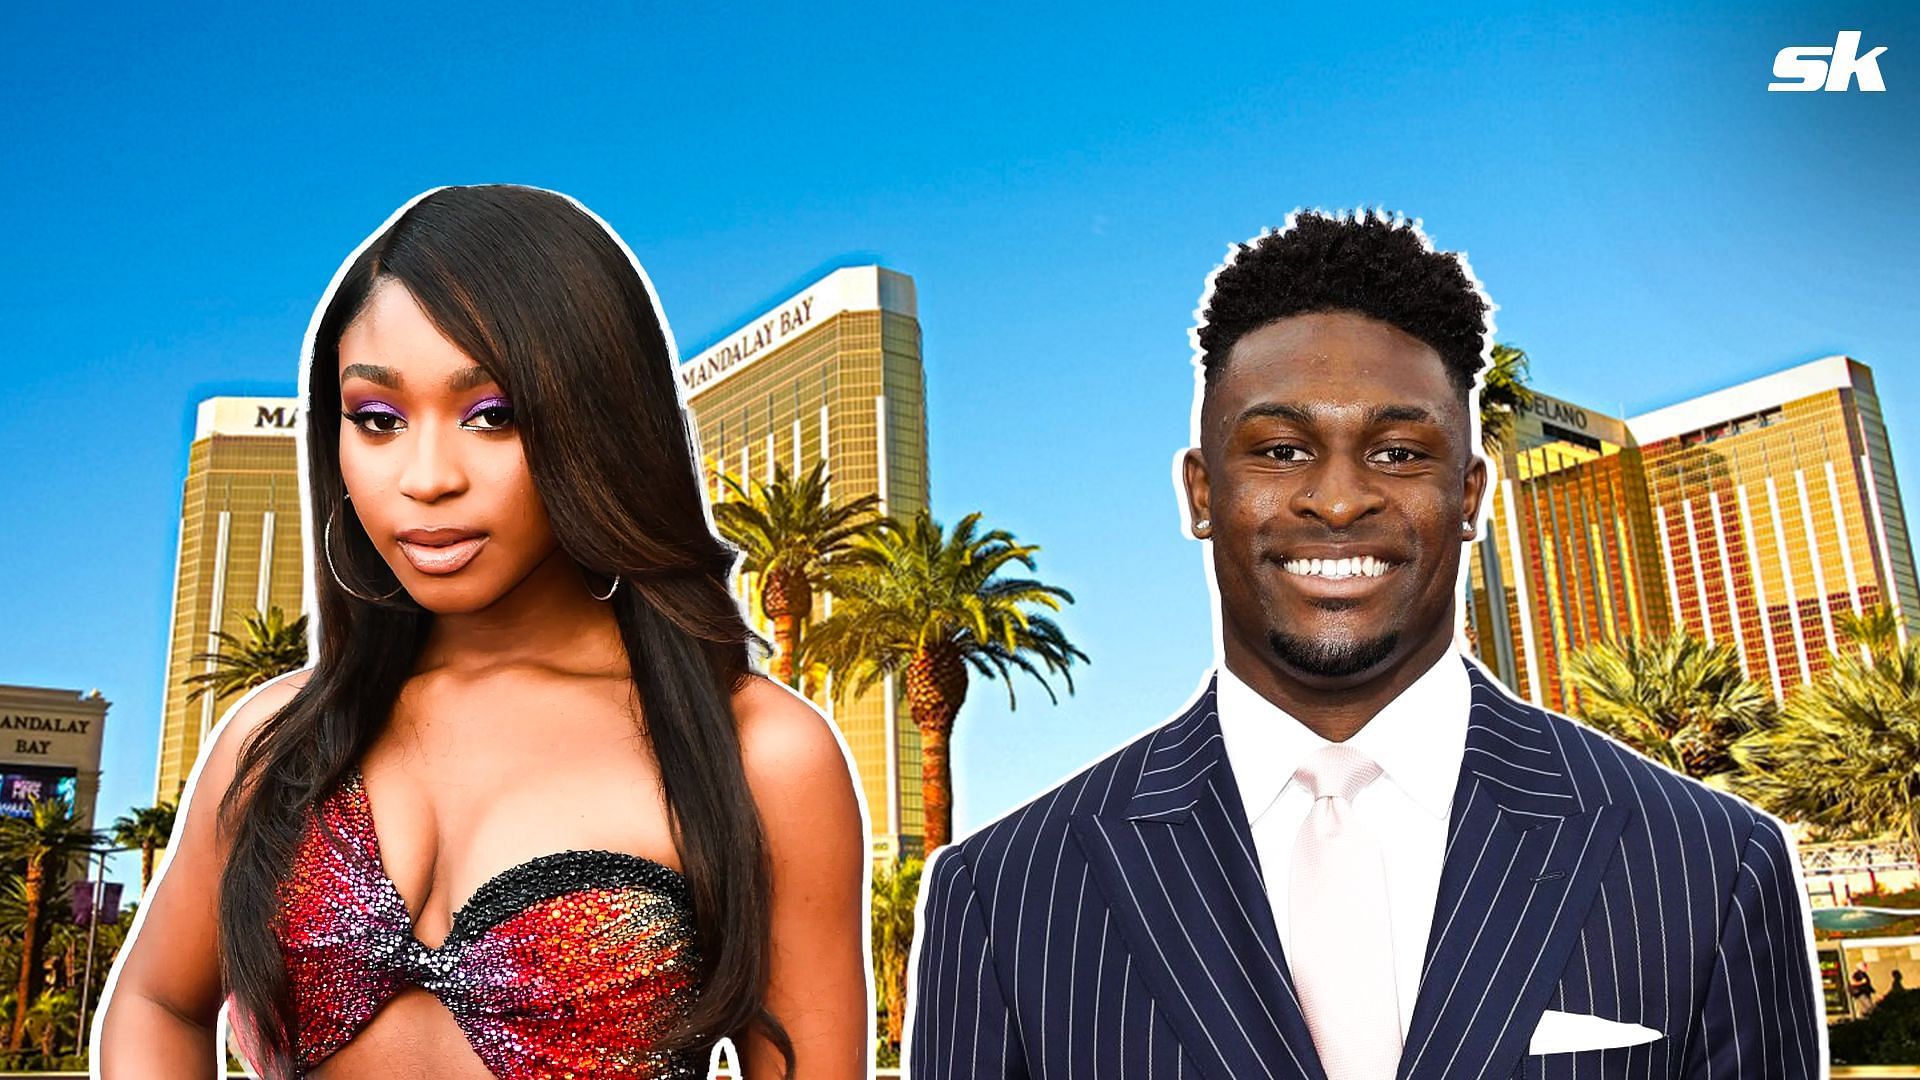 Seattle Seahawks pass-catcher DK Metcalf now has a high-profile girlfriend in singer Normani